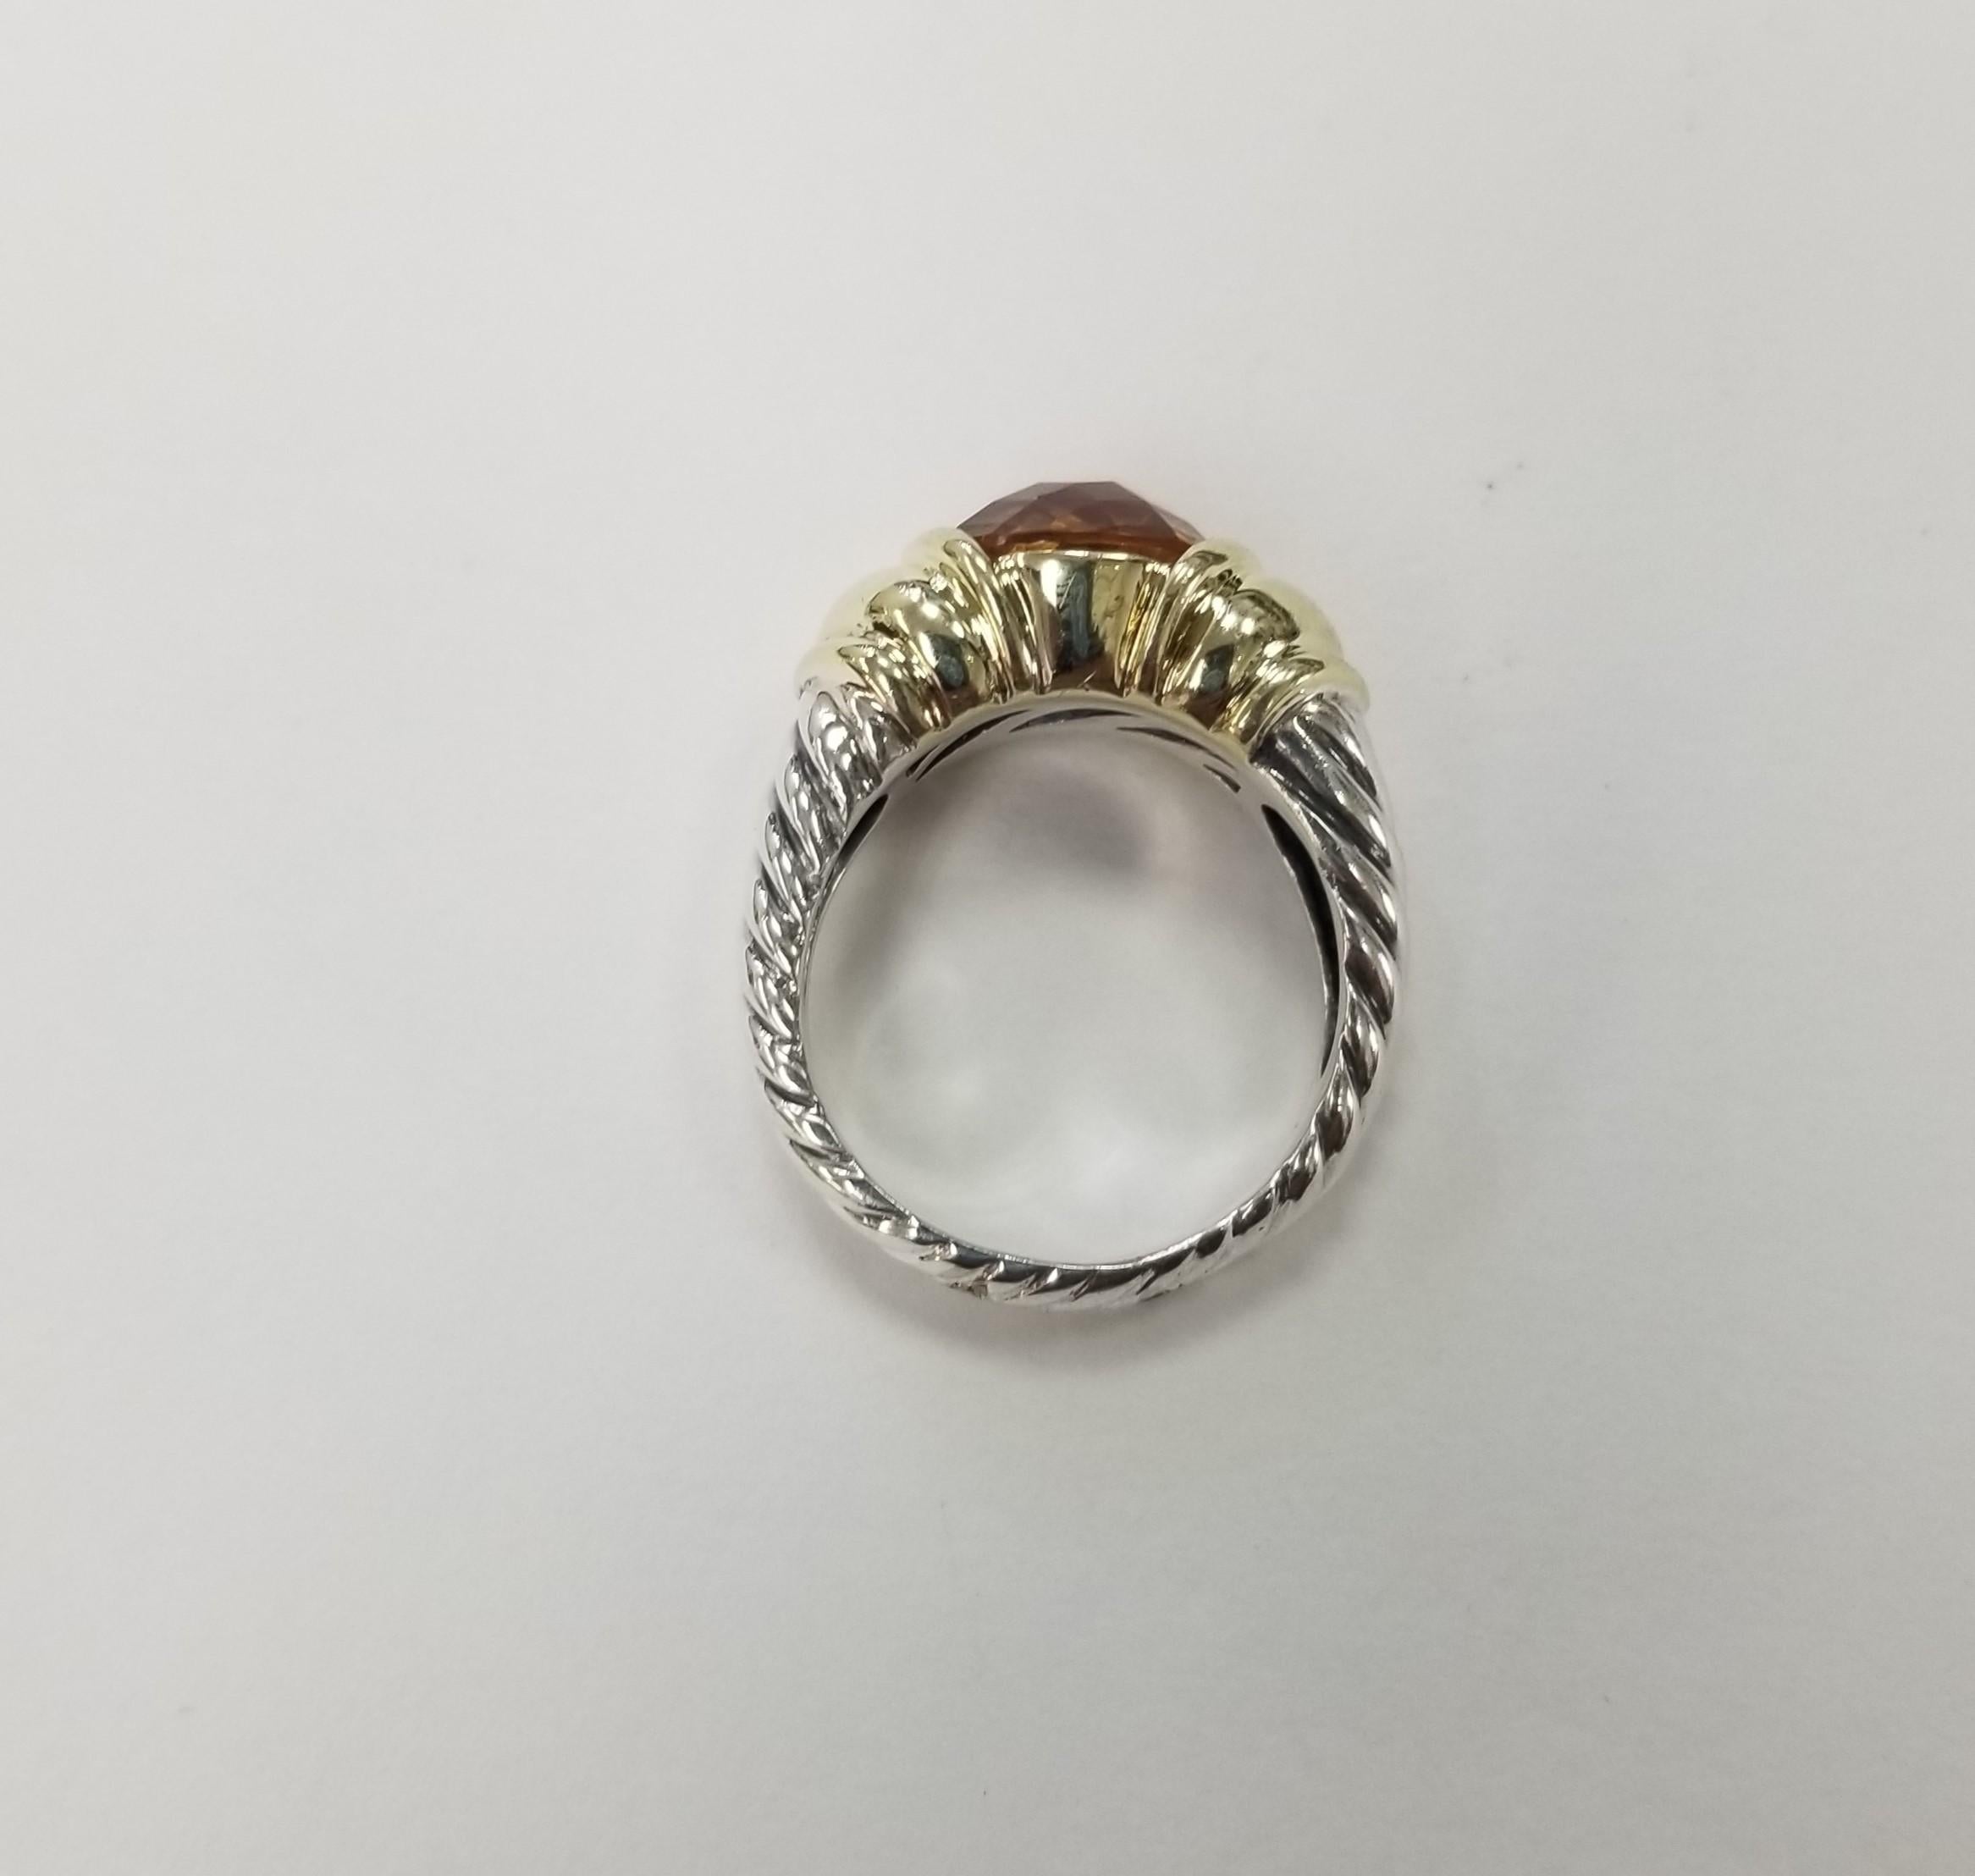 14k Yellow Gold And Silver Checker Board Citrine Ring
Specifications:
    main stone: 12.11 mm Citrine
    metal: 14K Yellow Gold and Silver
    type: ring
    weight: 12.60gr
    size: 9 US
  